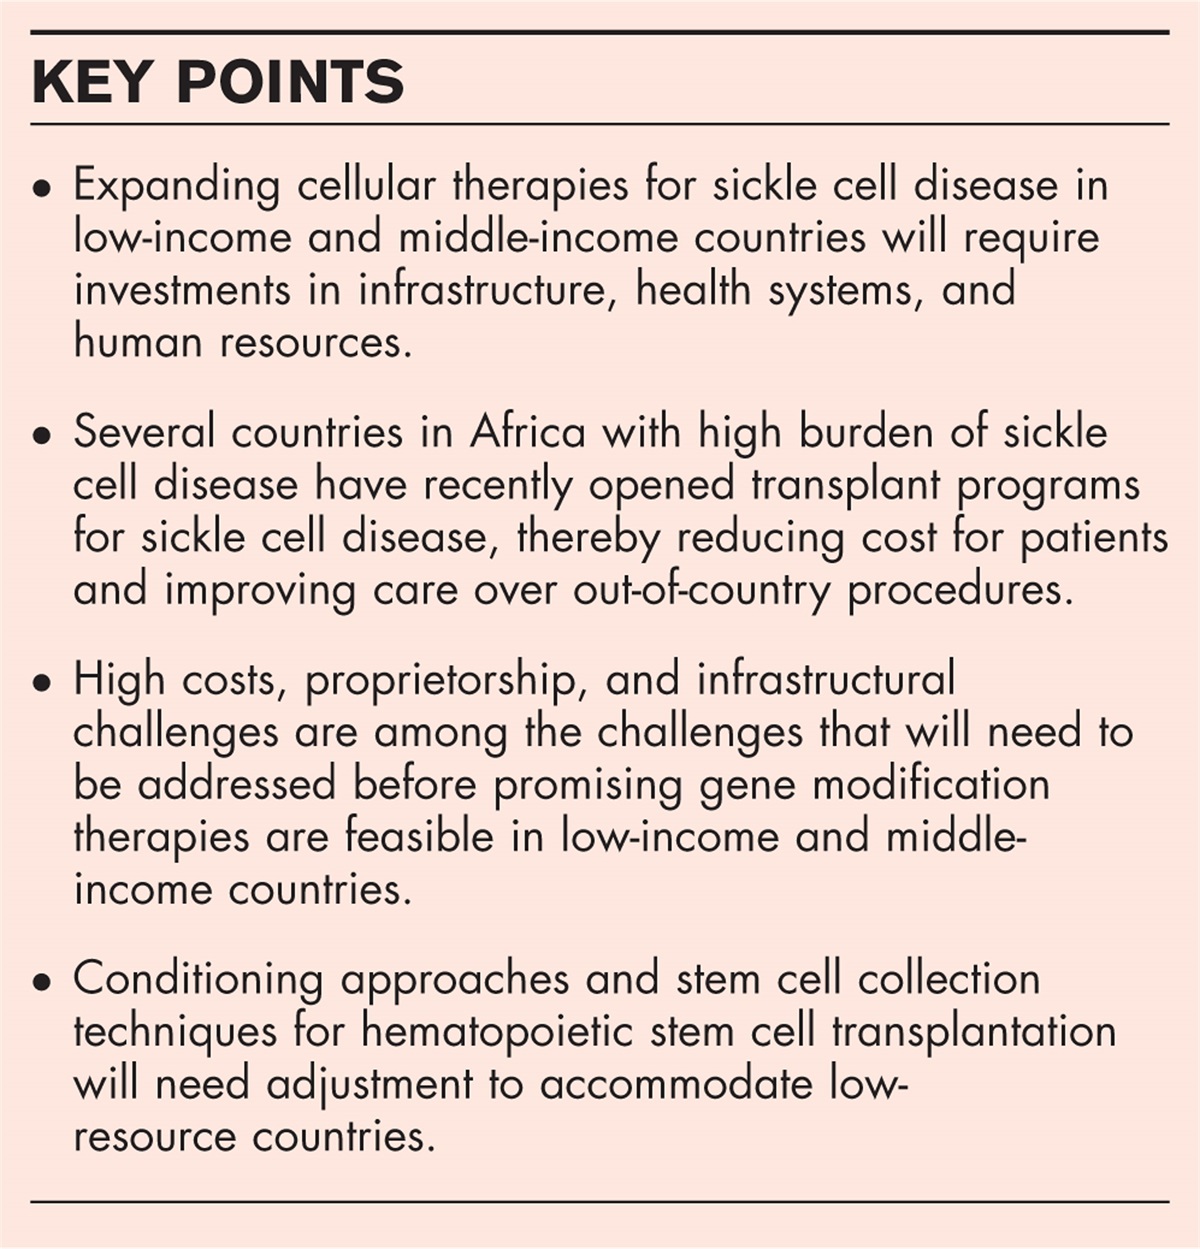 Global perspectives on cellular therapy for children with sickle cell disease